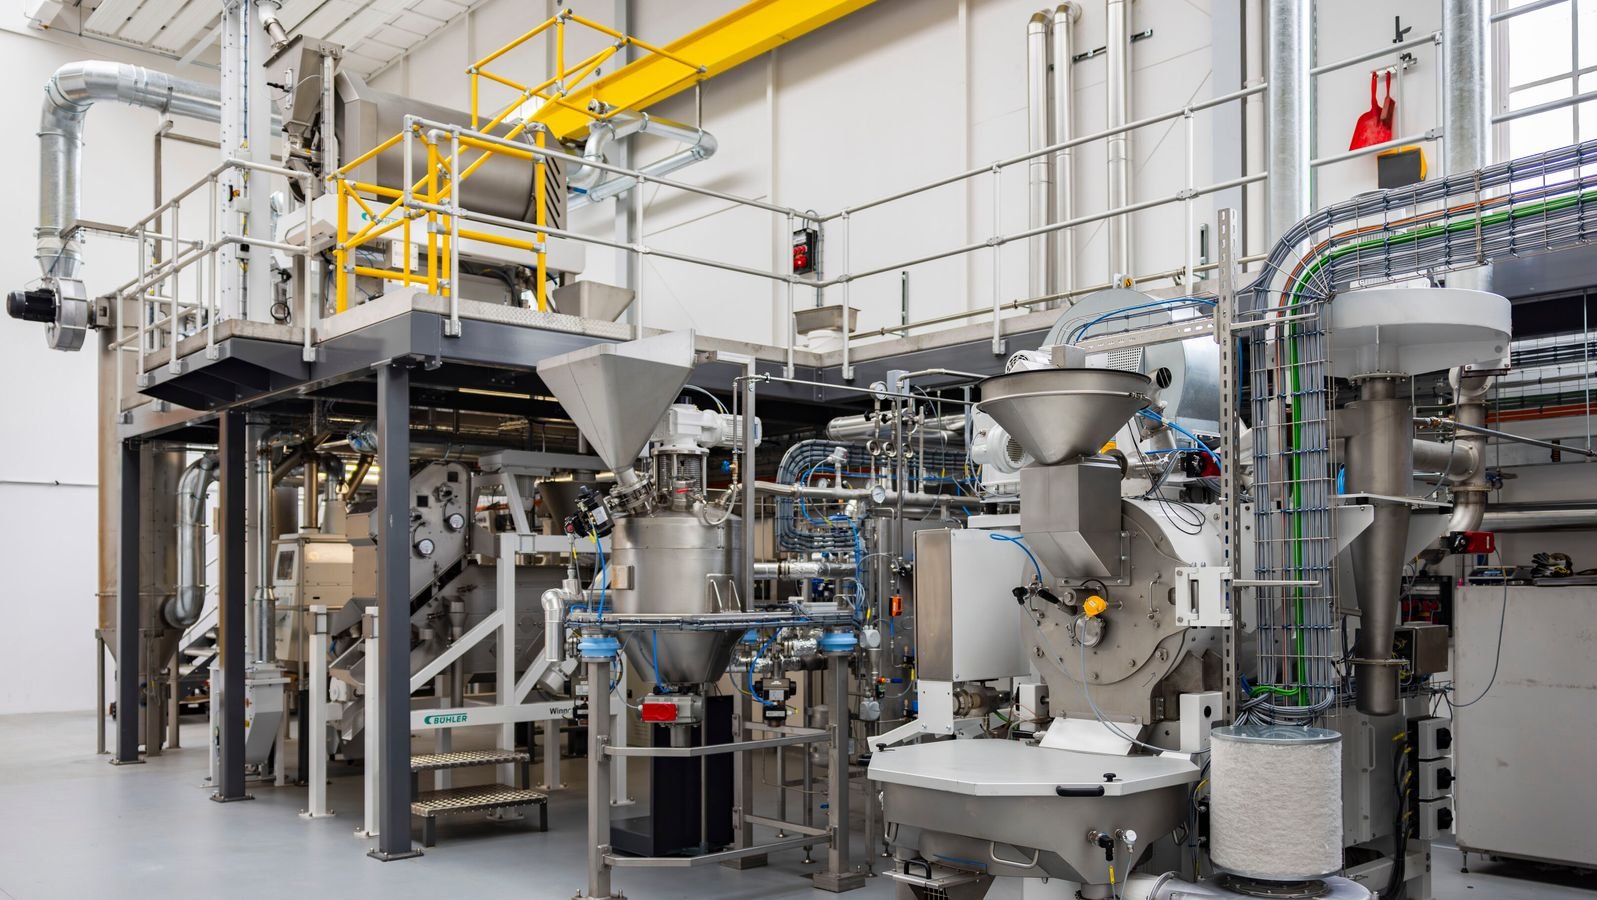 Bühler’s Flavor Creation Centre operates at full power for customers